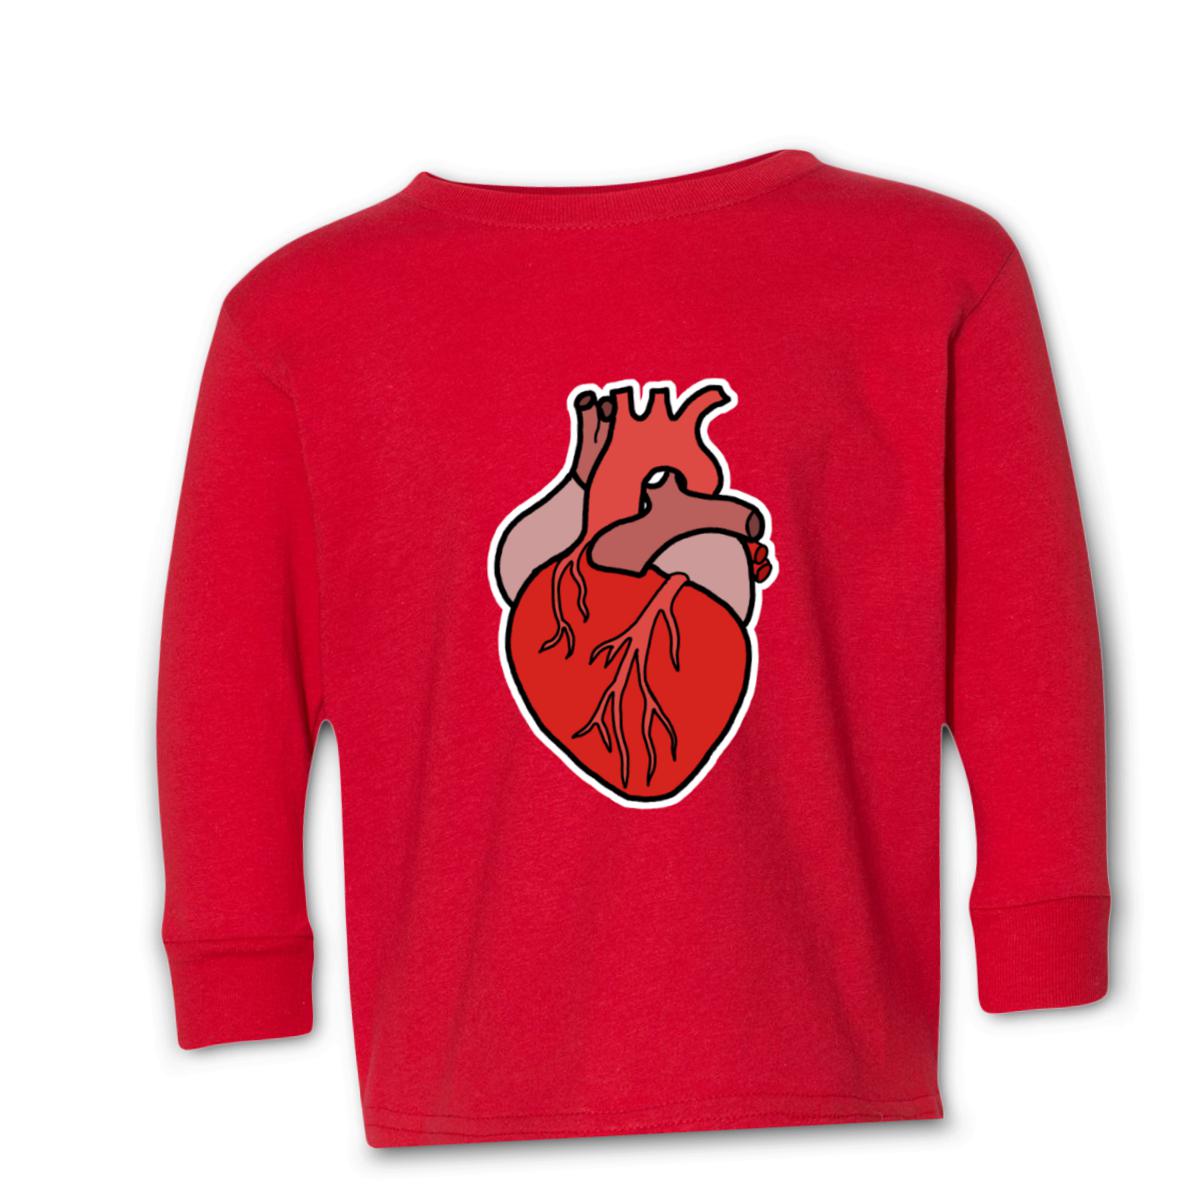 Illustrative Heart Toddler Long Sleeve Tee 56T red